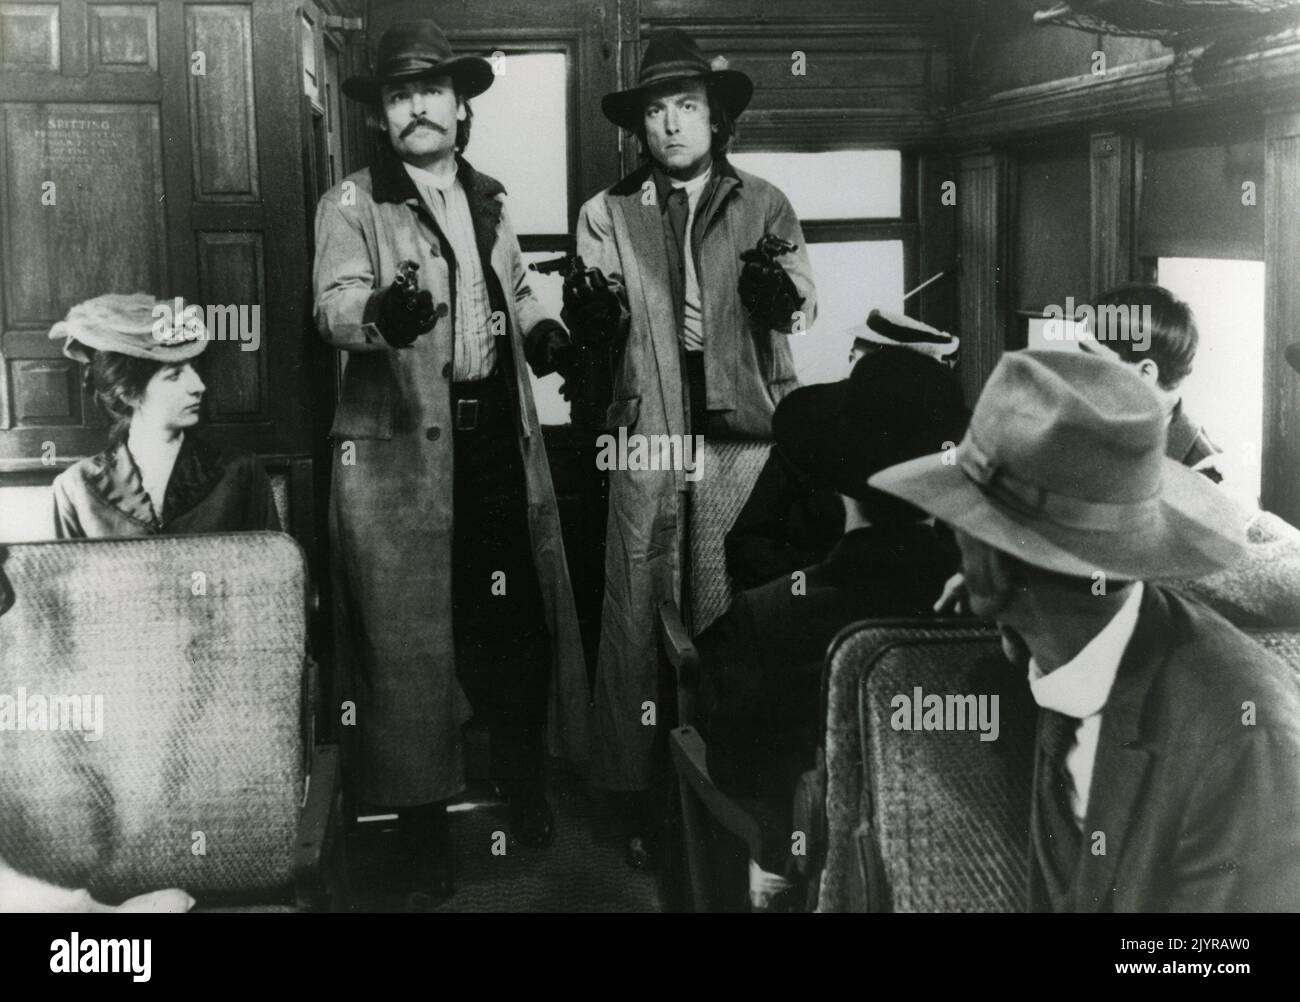 American actors Stacy Keach and James Keach in the movie The Long Riders, USA 1980 Stock Photo